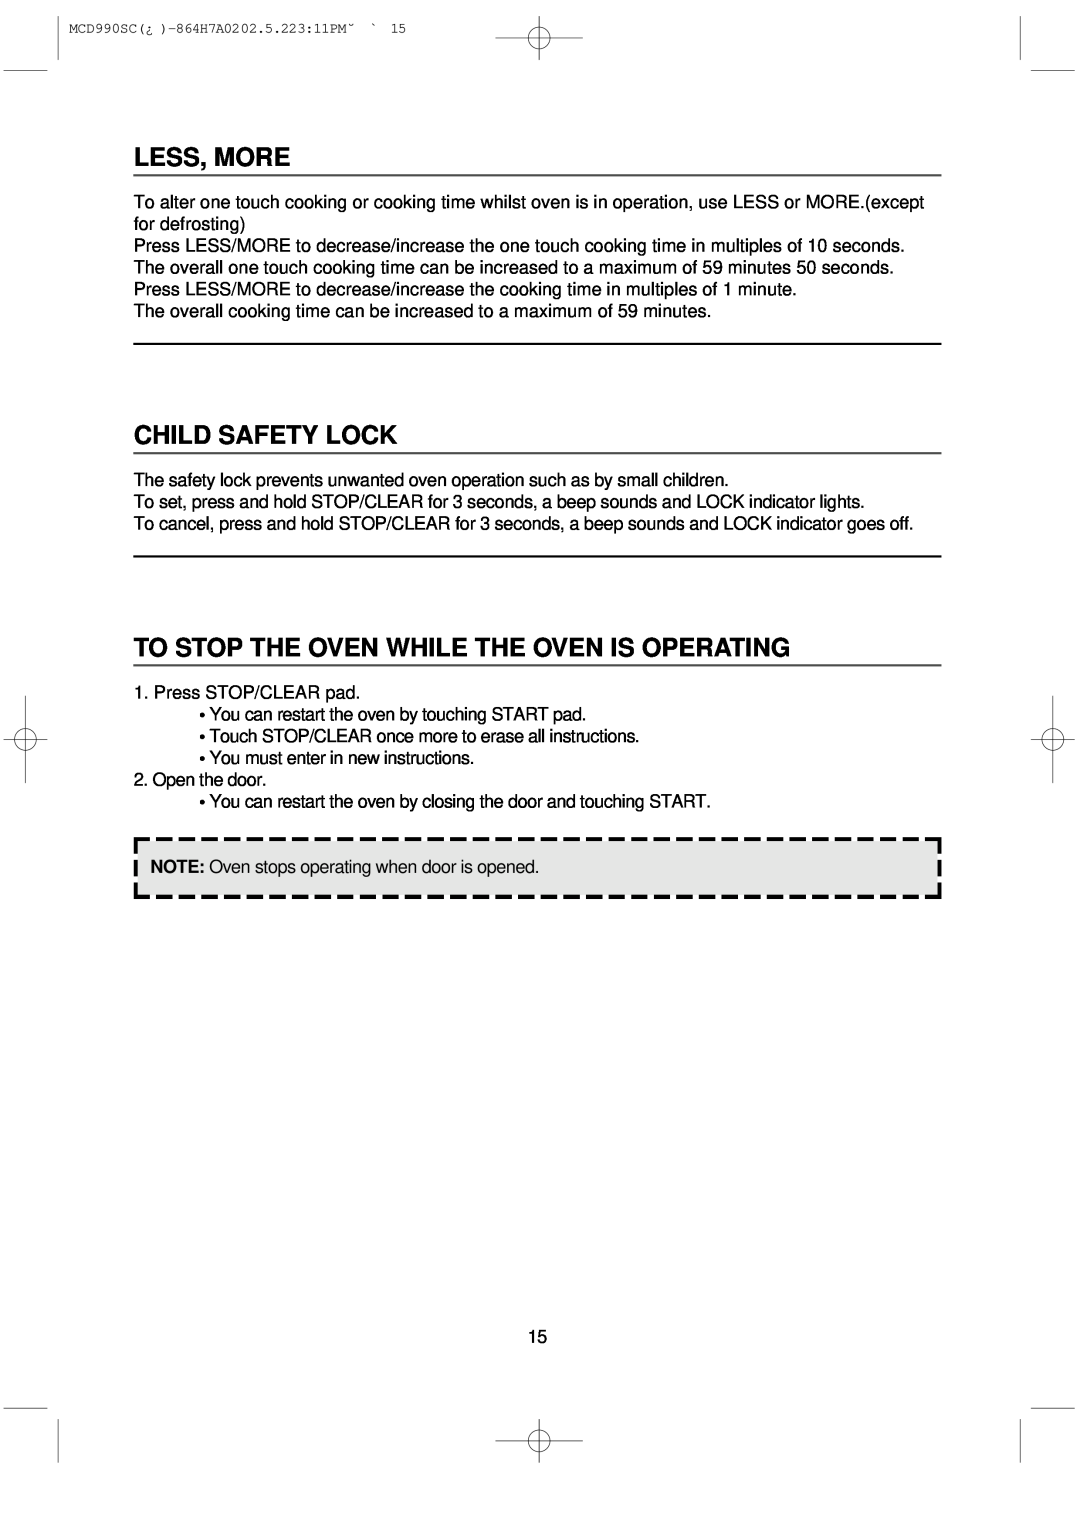 Magic Chef MCD990SC instruction manual Less, More, Child Safety Lock, To Stop The Oven While The Oven Is Operating 